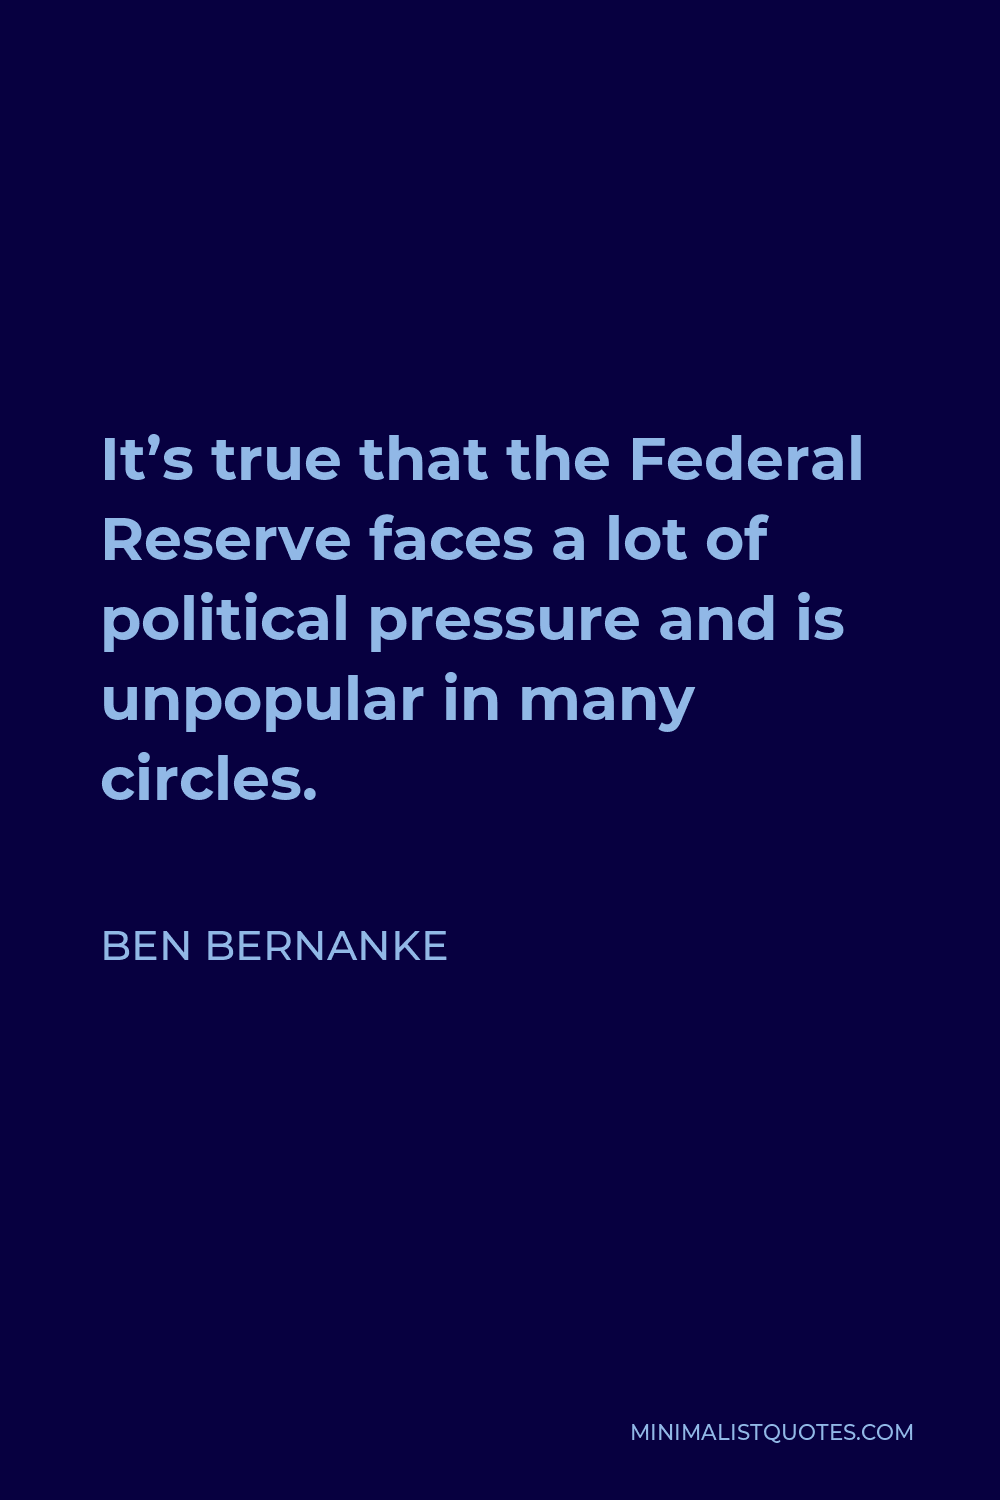 Ben Bernanke Quote - It’s true that the Federal Reserve faces a lot of political pressure and is unpopular in many circles.